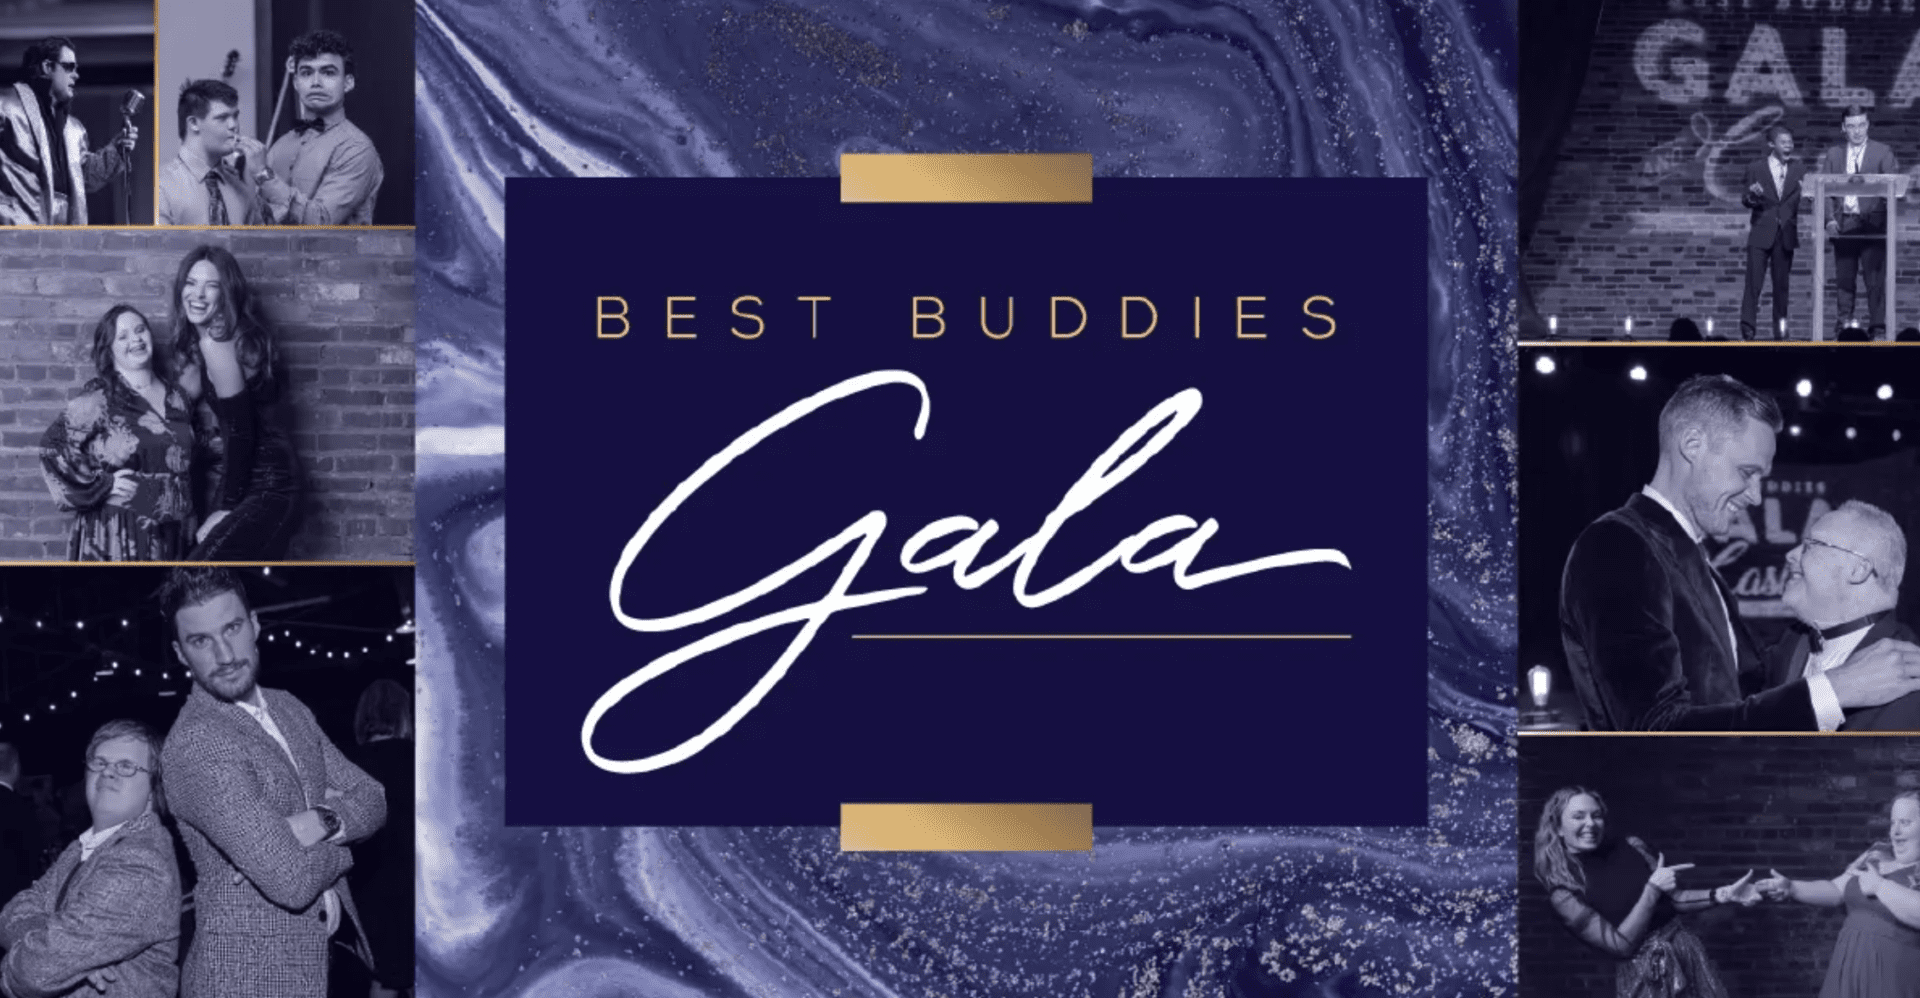 Best Buddies Gala in Franklin, TN, the event offers elegant food, drinks, robust silent & live auctions, and live music from The Downtown Band, all while supporting the mission of Best Buddies and making Tennessee a more inclusive place.